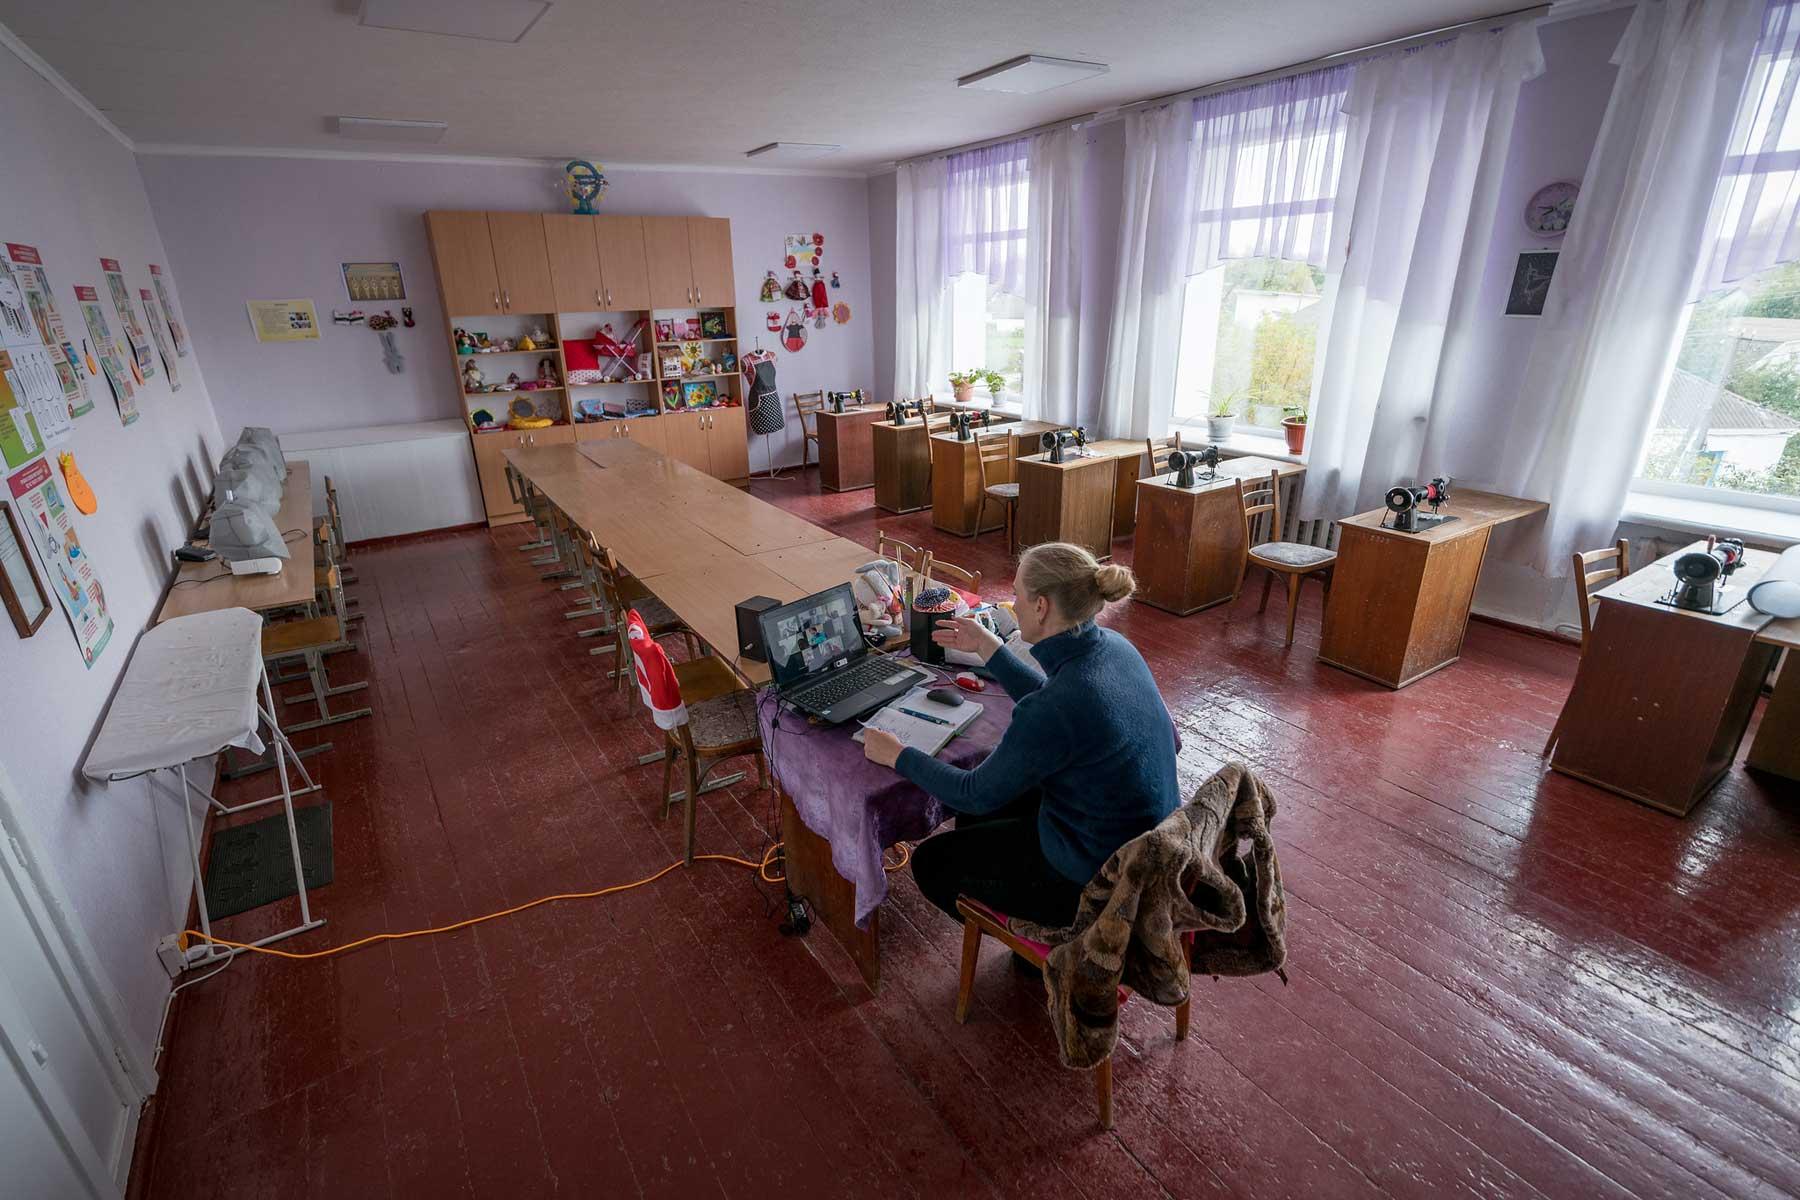 Teacher Natalia Koval leads an online class in textile handiwork at the Ichnya school of Vasilchenko in the Ichnya municipality of Chernihiv Oblast, Ukraine. The school is currently empty of its students, with classes taught online only until secure bomb shelters can be restored at the school. All photos: LWF/Albin Hillert